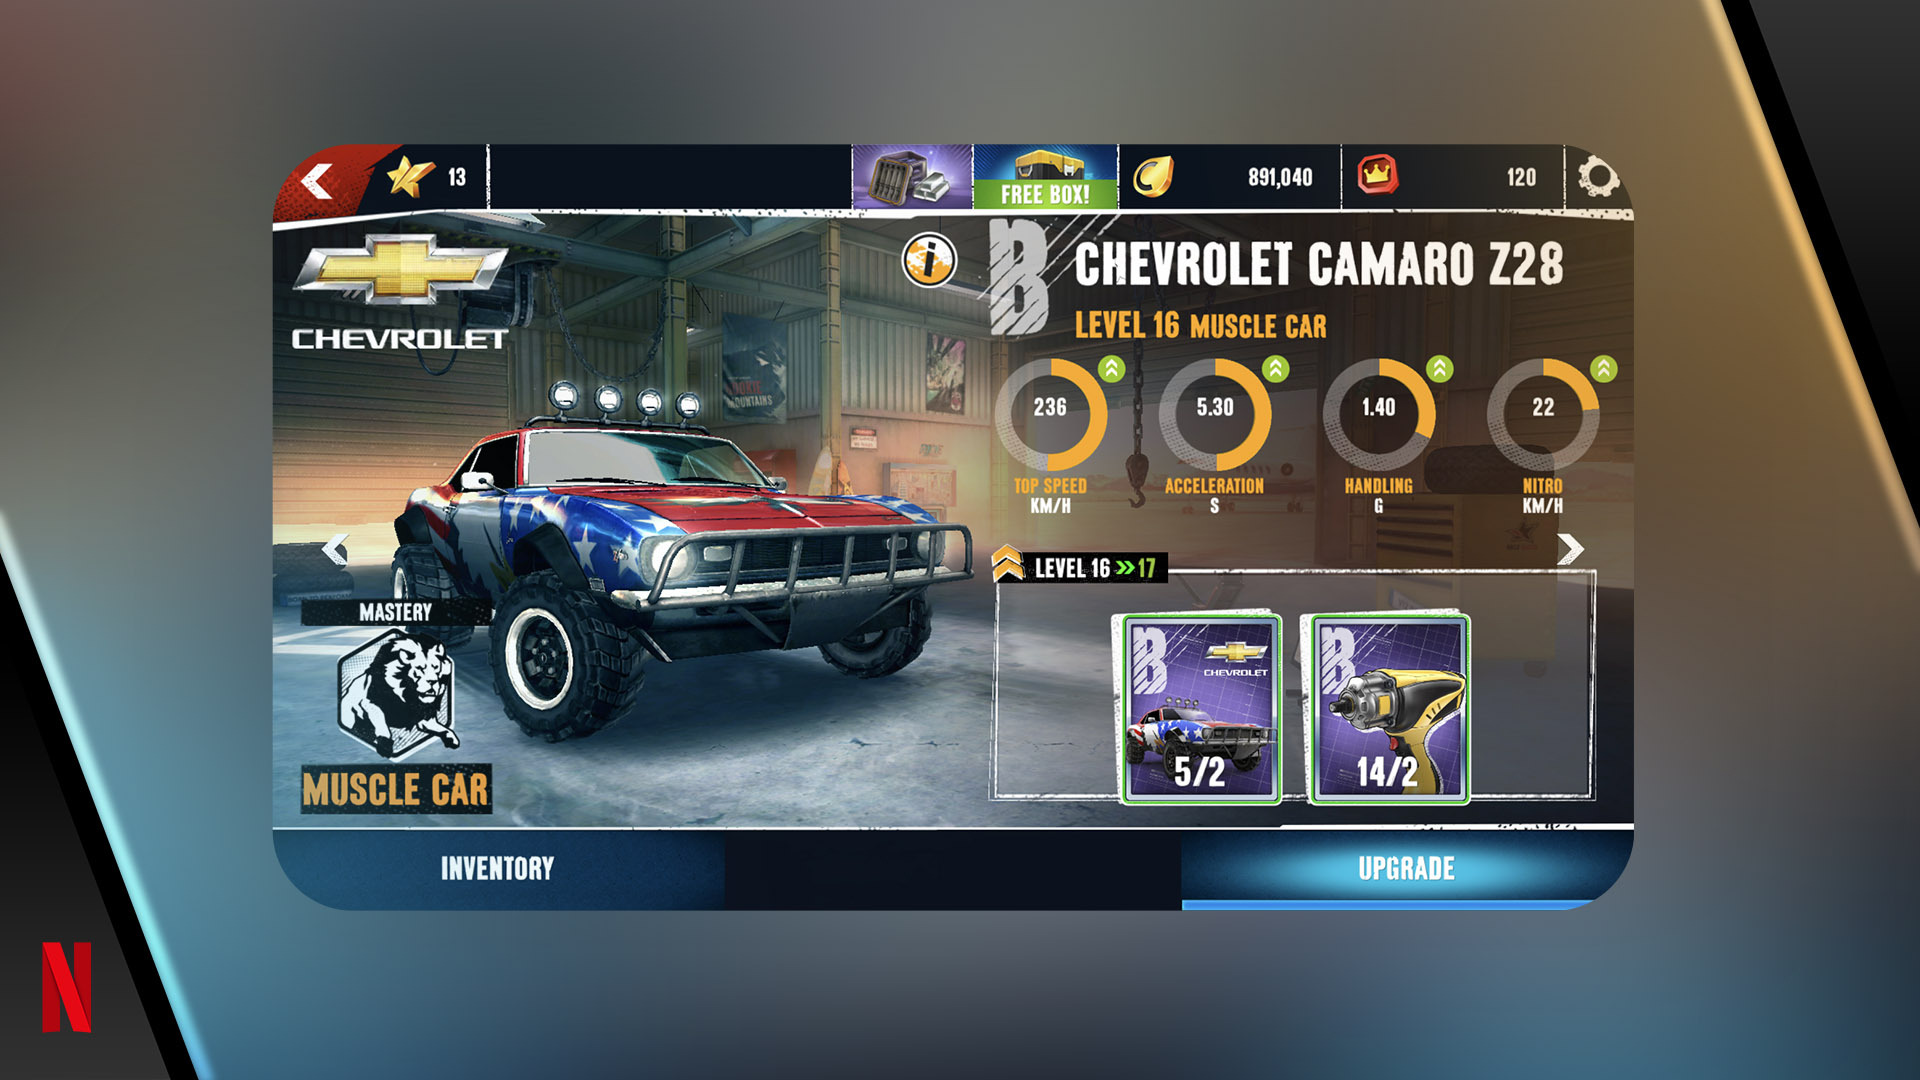 Gameloft is bringing Asphalt Xtreme and Zombie Anarchy to the Windows Store  - MSPoweruser